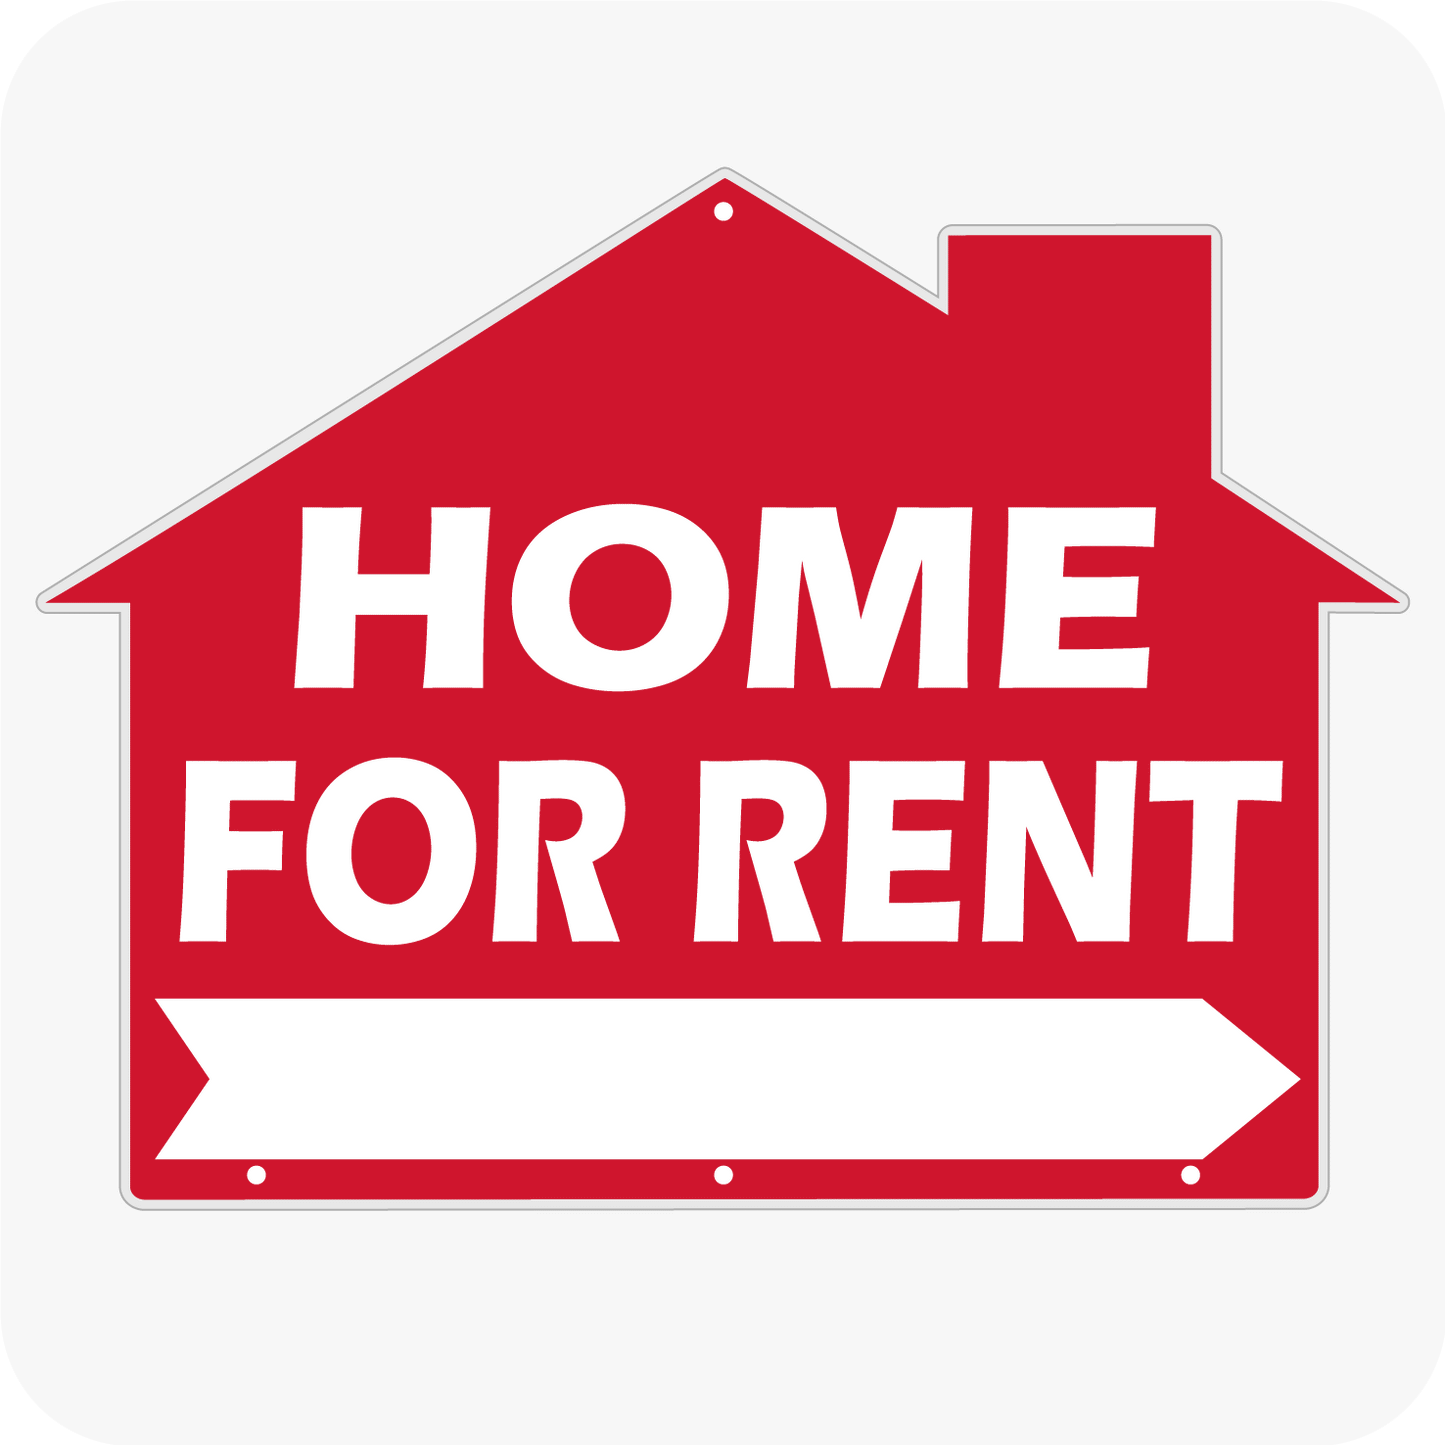 Home For Rent - House Shaped Sign 18x24 - Red